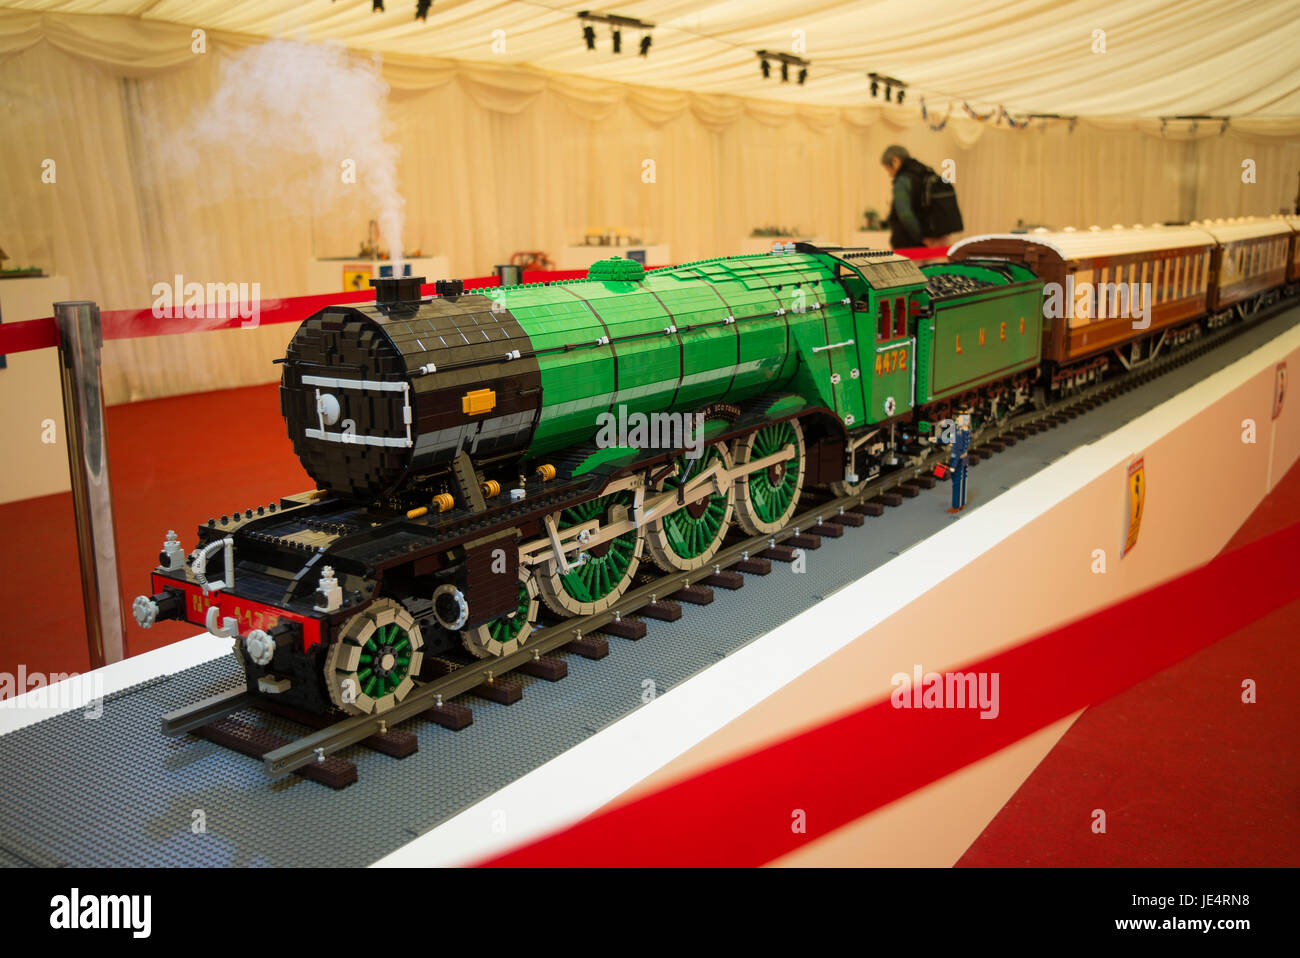 MA fine scale model of the Flying Scotsman steam locomotive made entirely from Lego plastic building bricks. A travelling exhibition in the UK Stock Photo